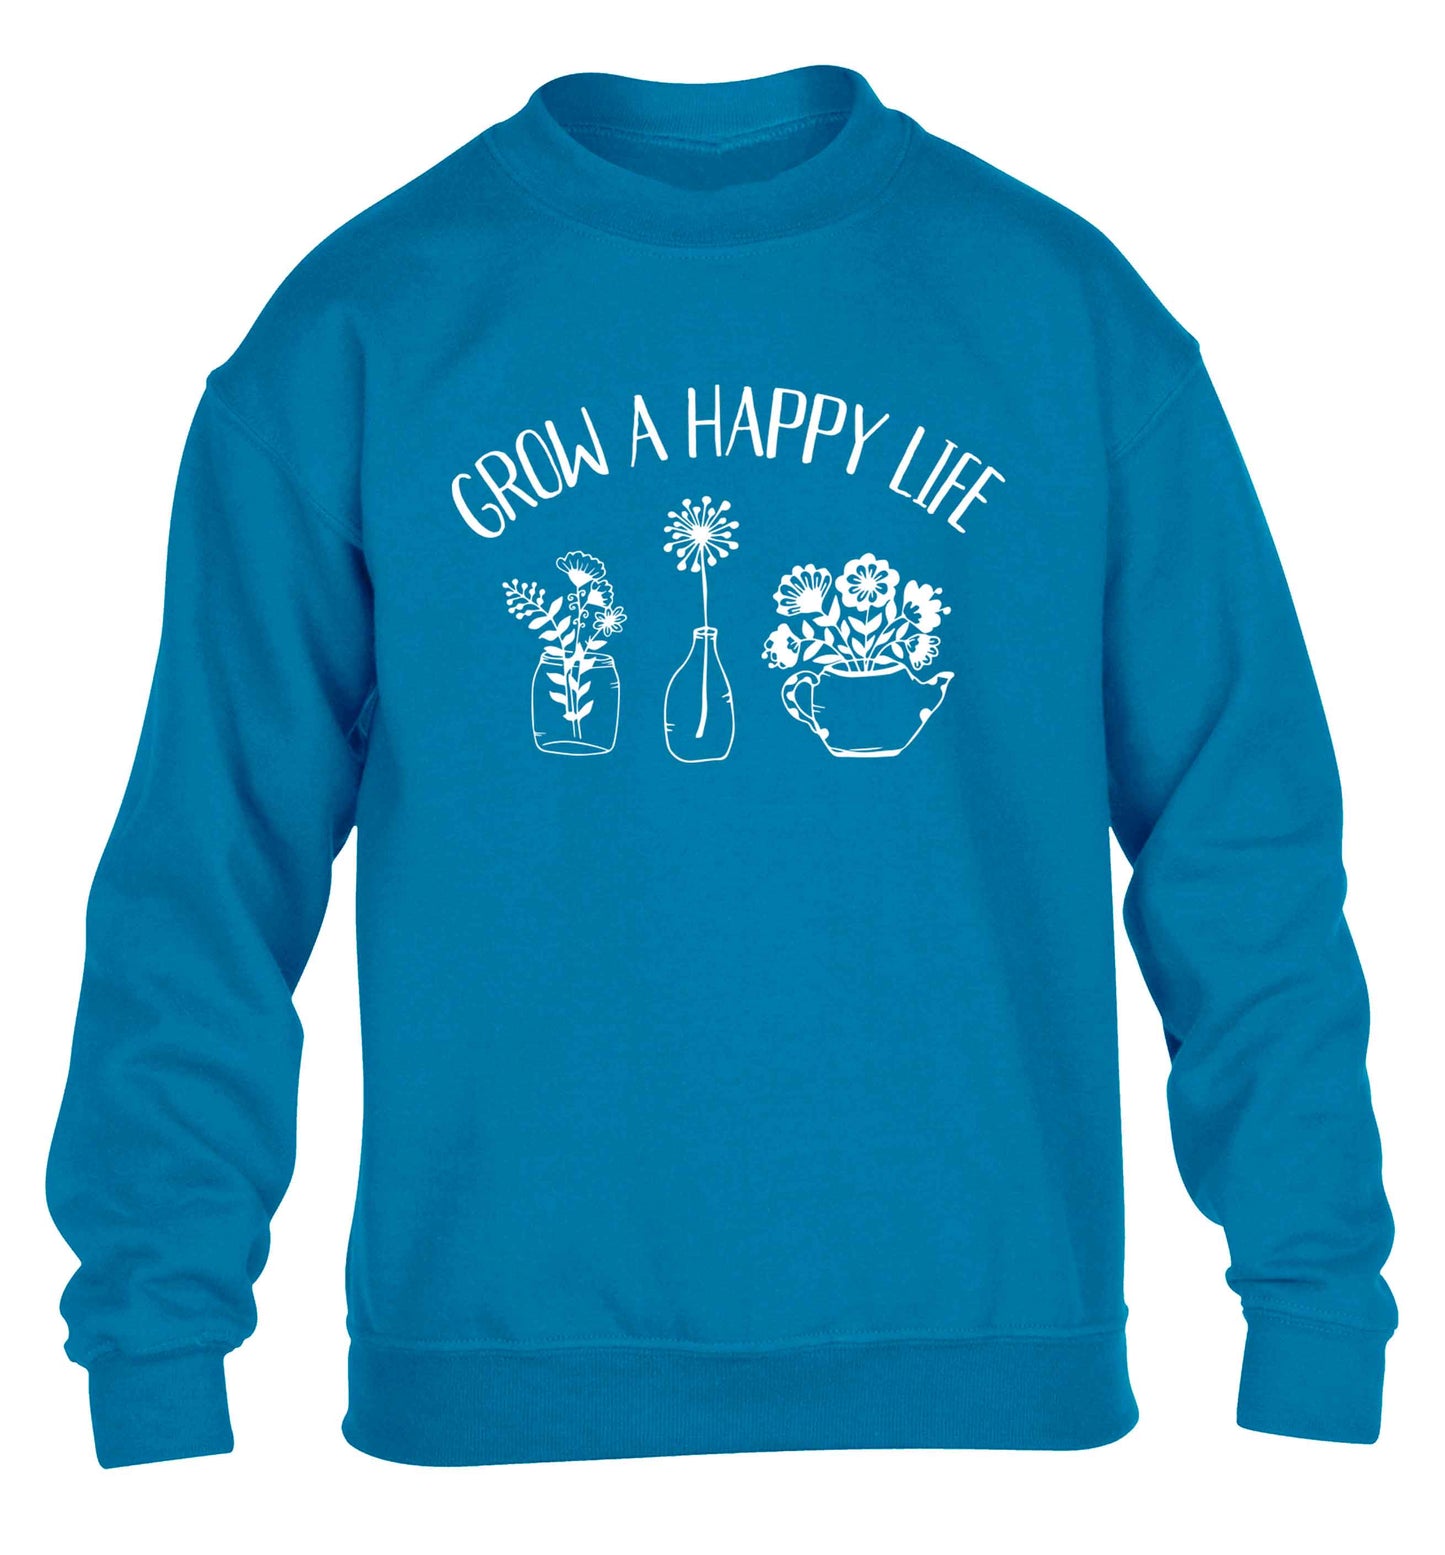 Grow a happy life children's blue sweater 12-13 Years